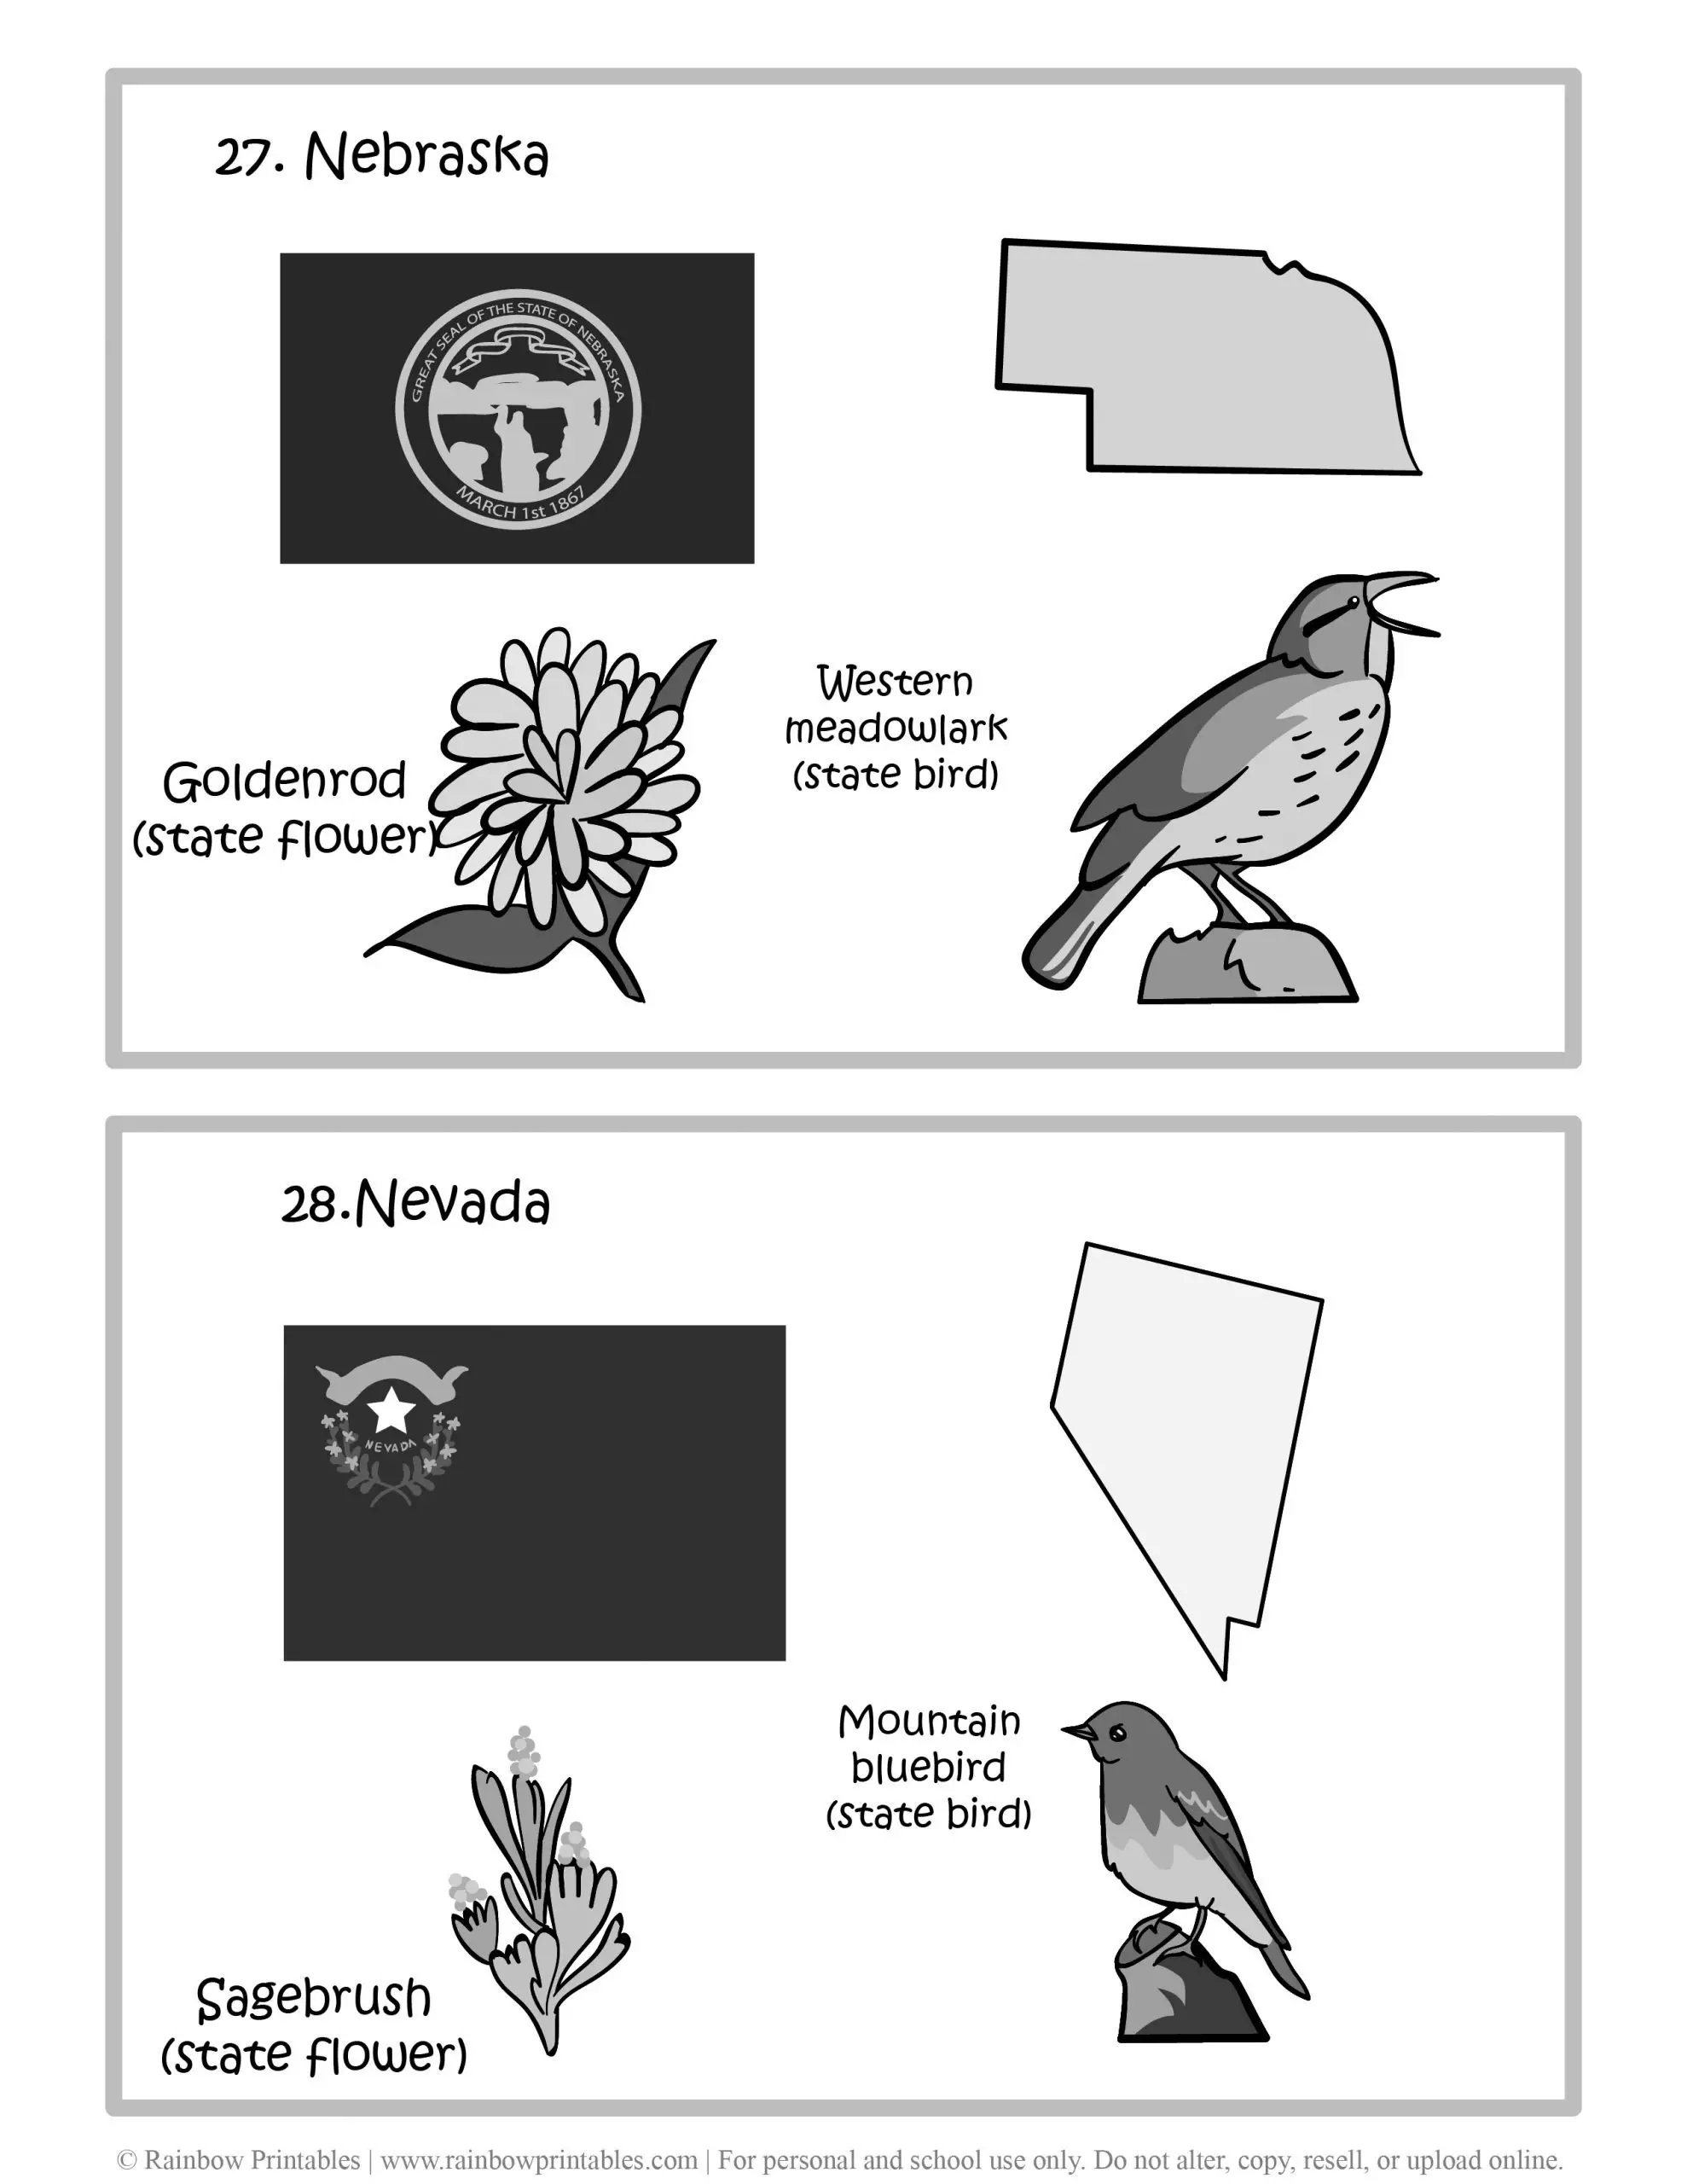 Nebraska, Nevada, 50 US State Flag, State Bird, State Flower, United States of America - American States Geography Worksheet Class Lesson Printables Flashcards Black White